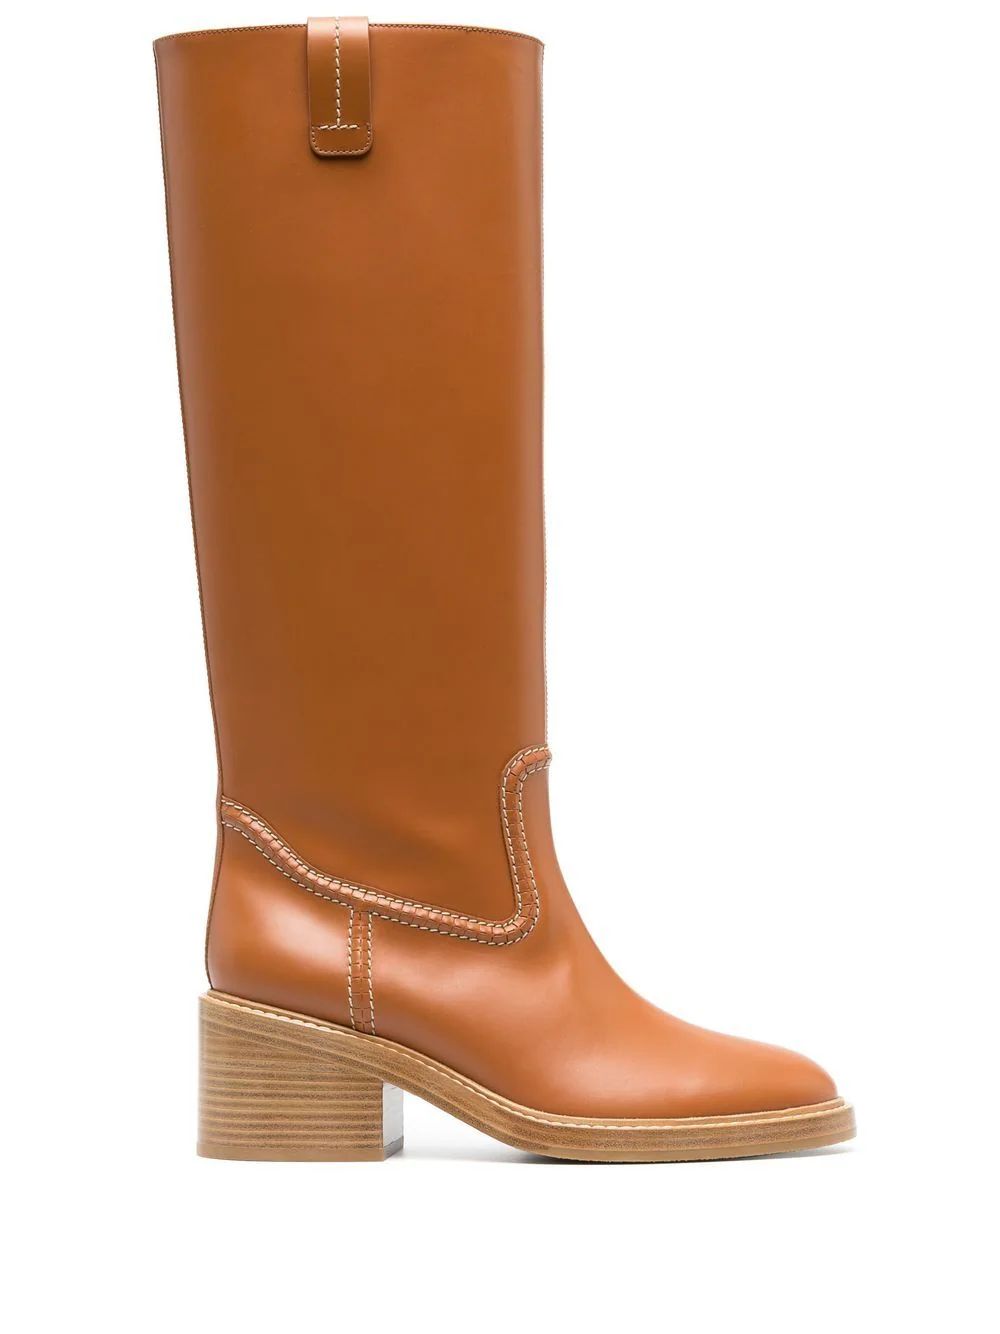 Mallo knee-high leather boots | Farfetch Global